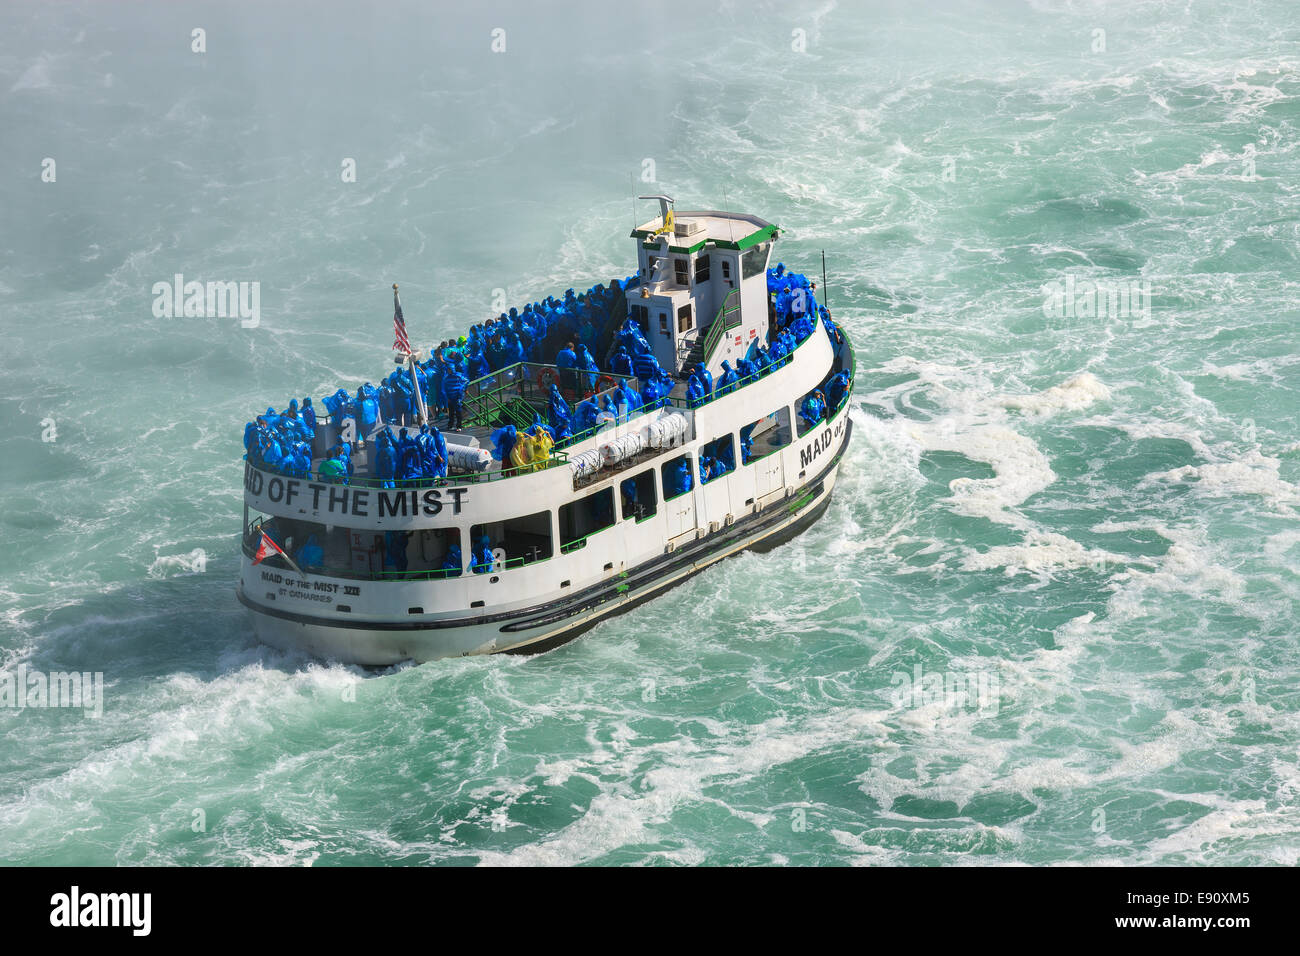 The Maid of the Mist loaded with tourists entering the Horseshoe Falls, part of the Niagara Falls, Ontario, Canada. Stock Photo